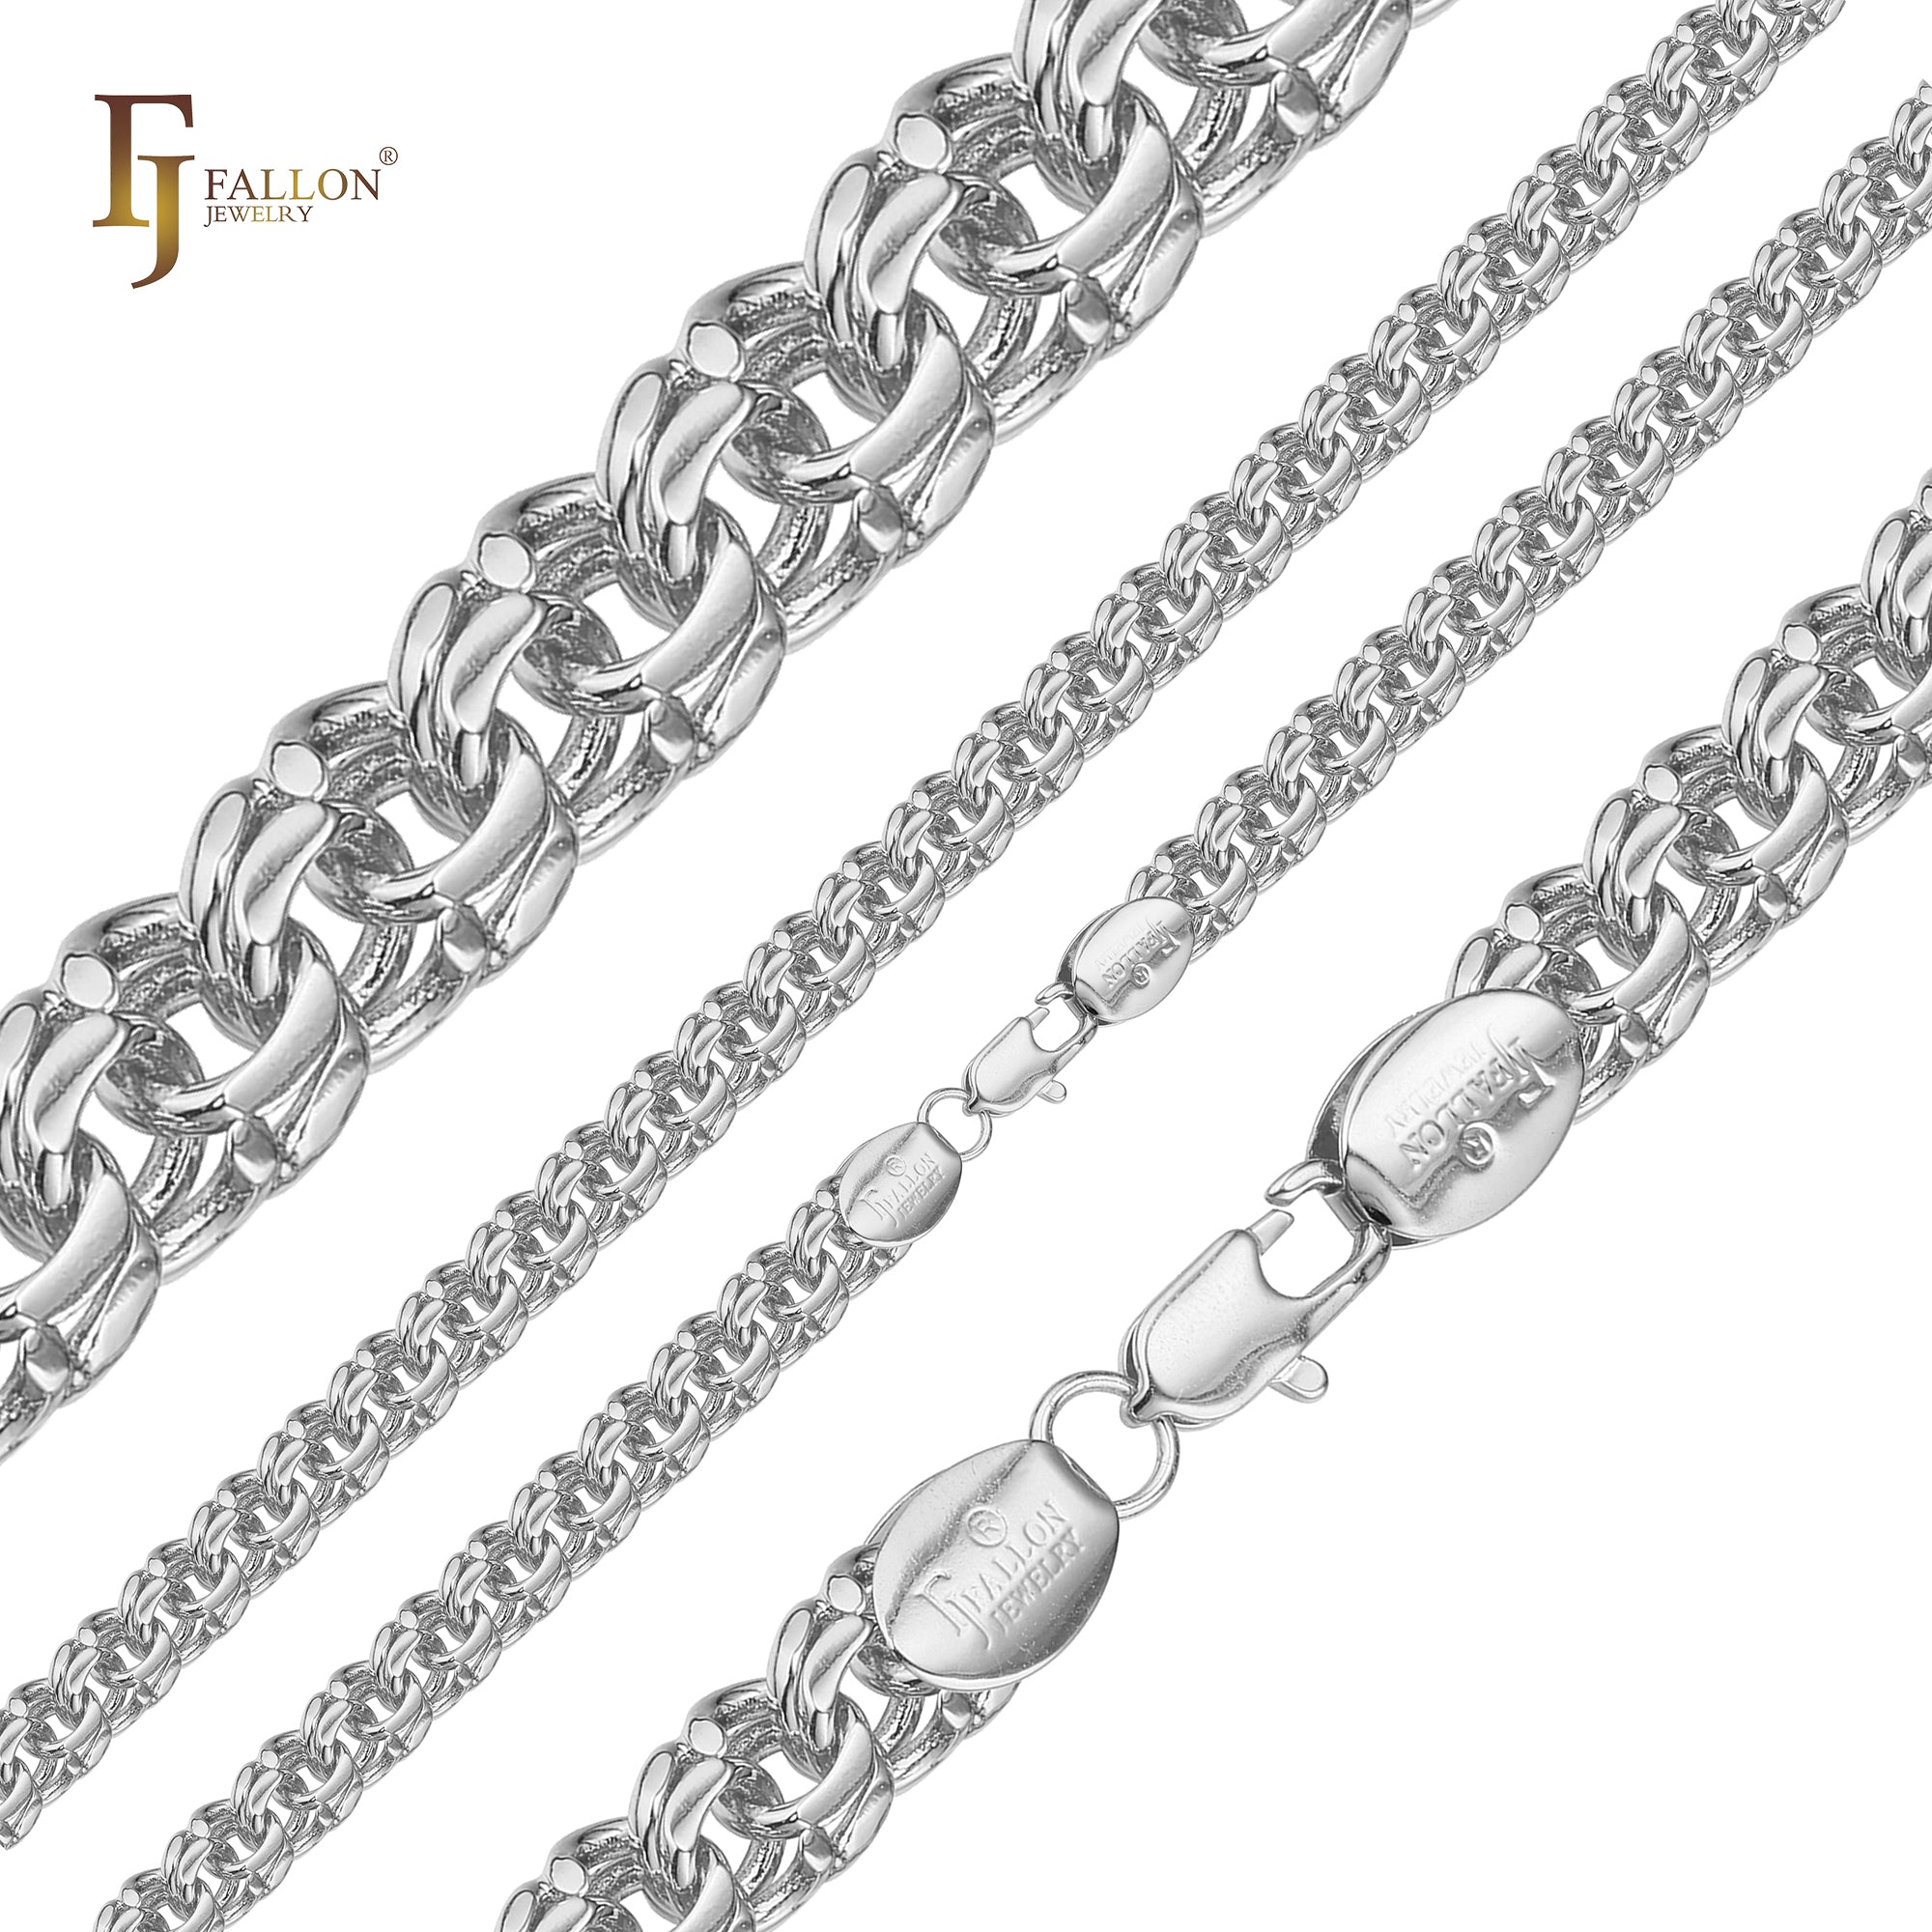 Bismarck spring double rolo link chains plated in White Gold, 14K Gold